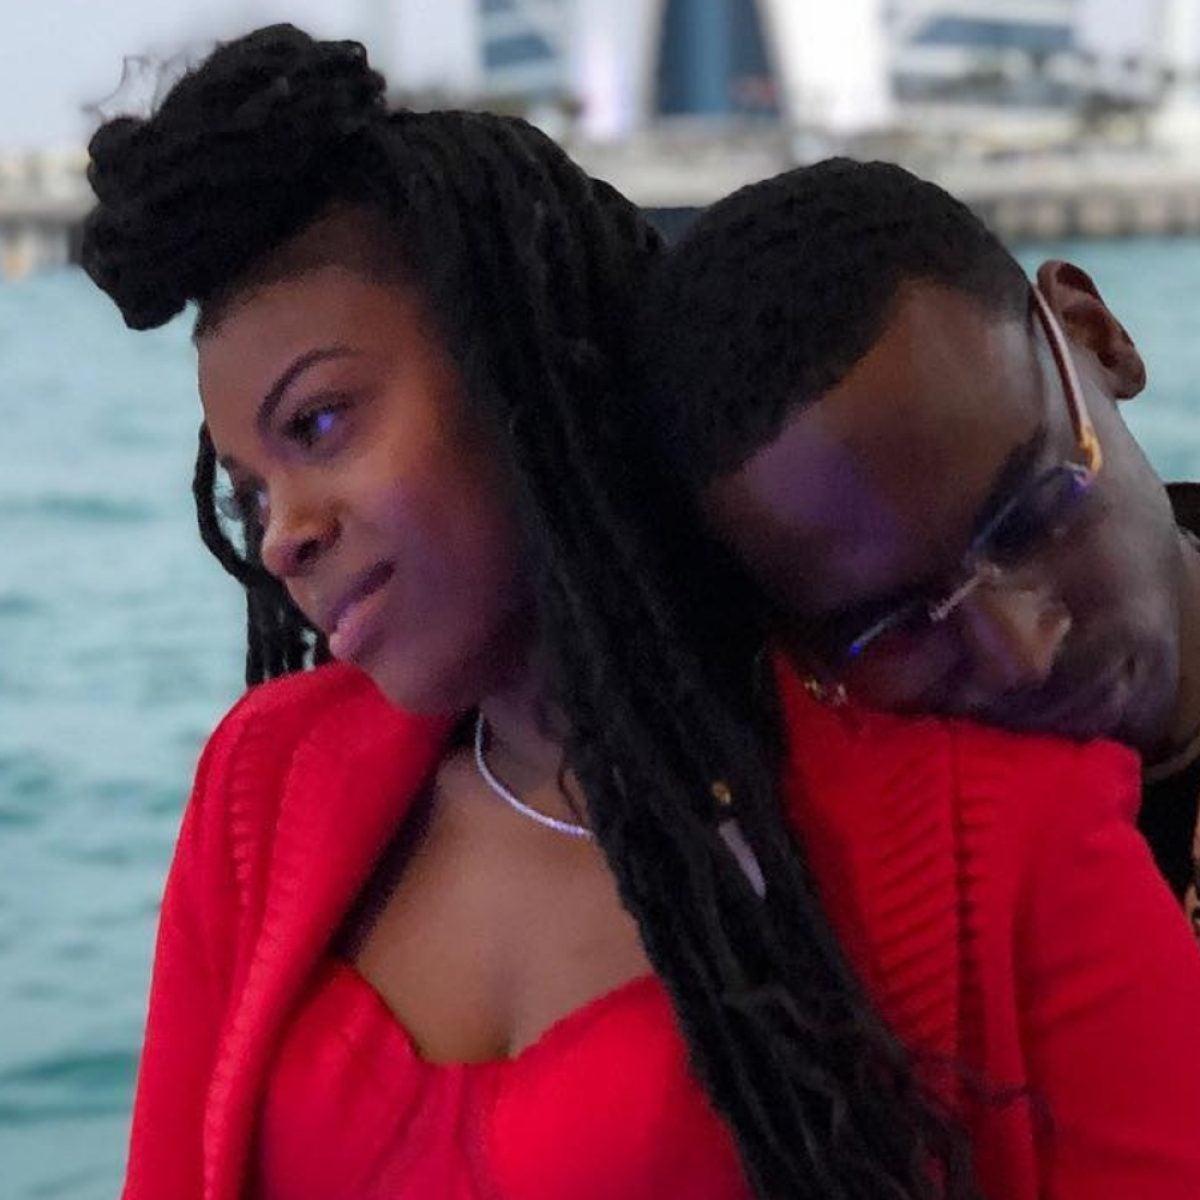 Photos Of Late Rapper Young Dolph And Longtime Love Mia Jaye From Their Nearly 10 Years Together